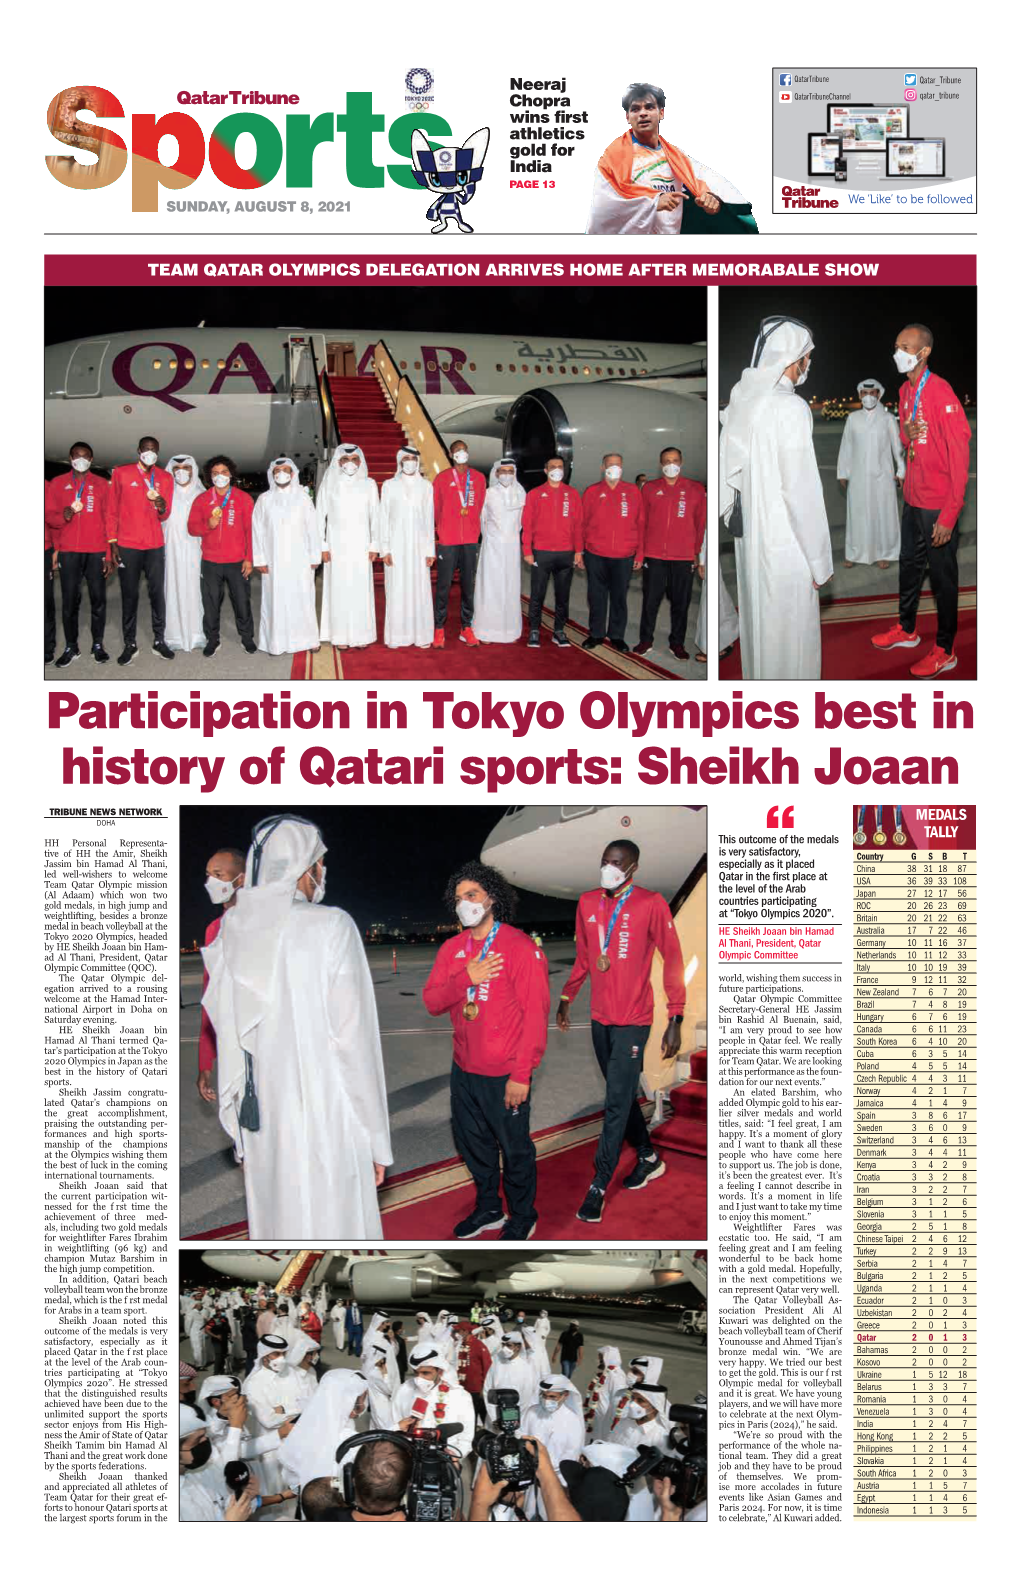 Participation in Tokyo Olympics Best in History of Qatari Sports: Sheikh Joaan